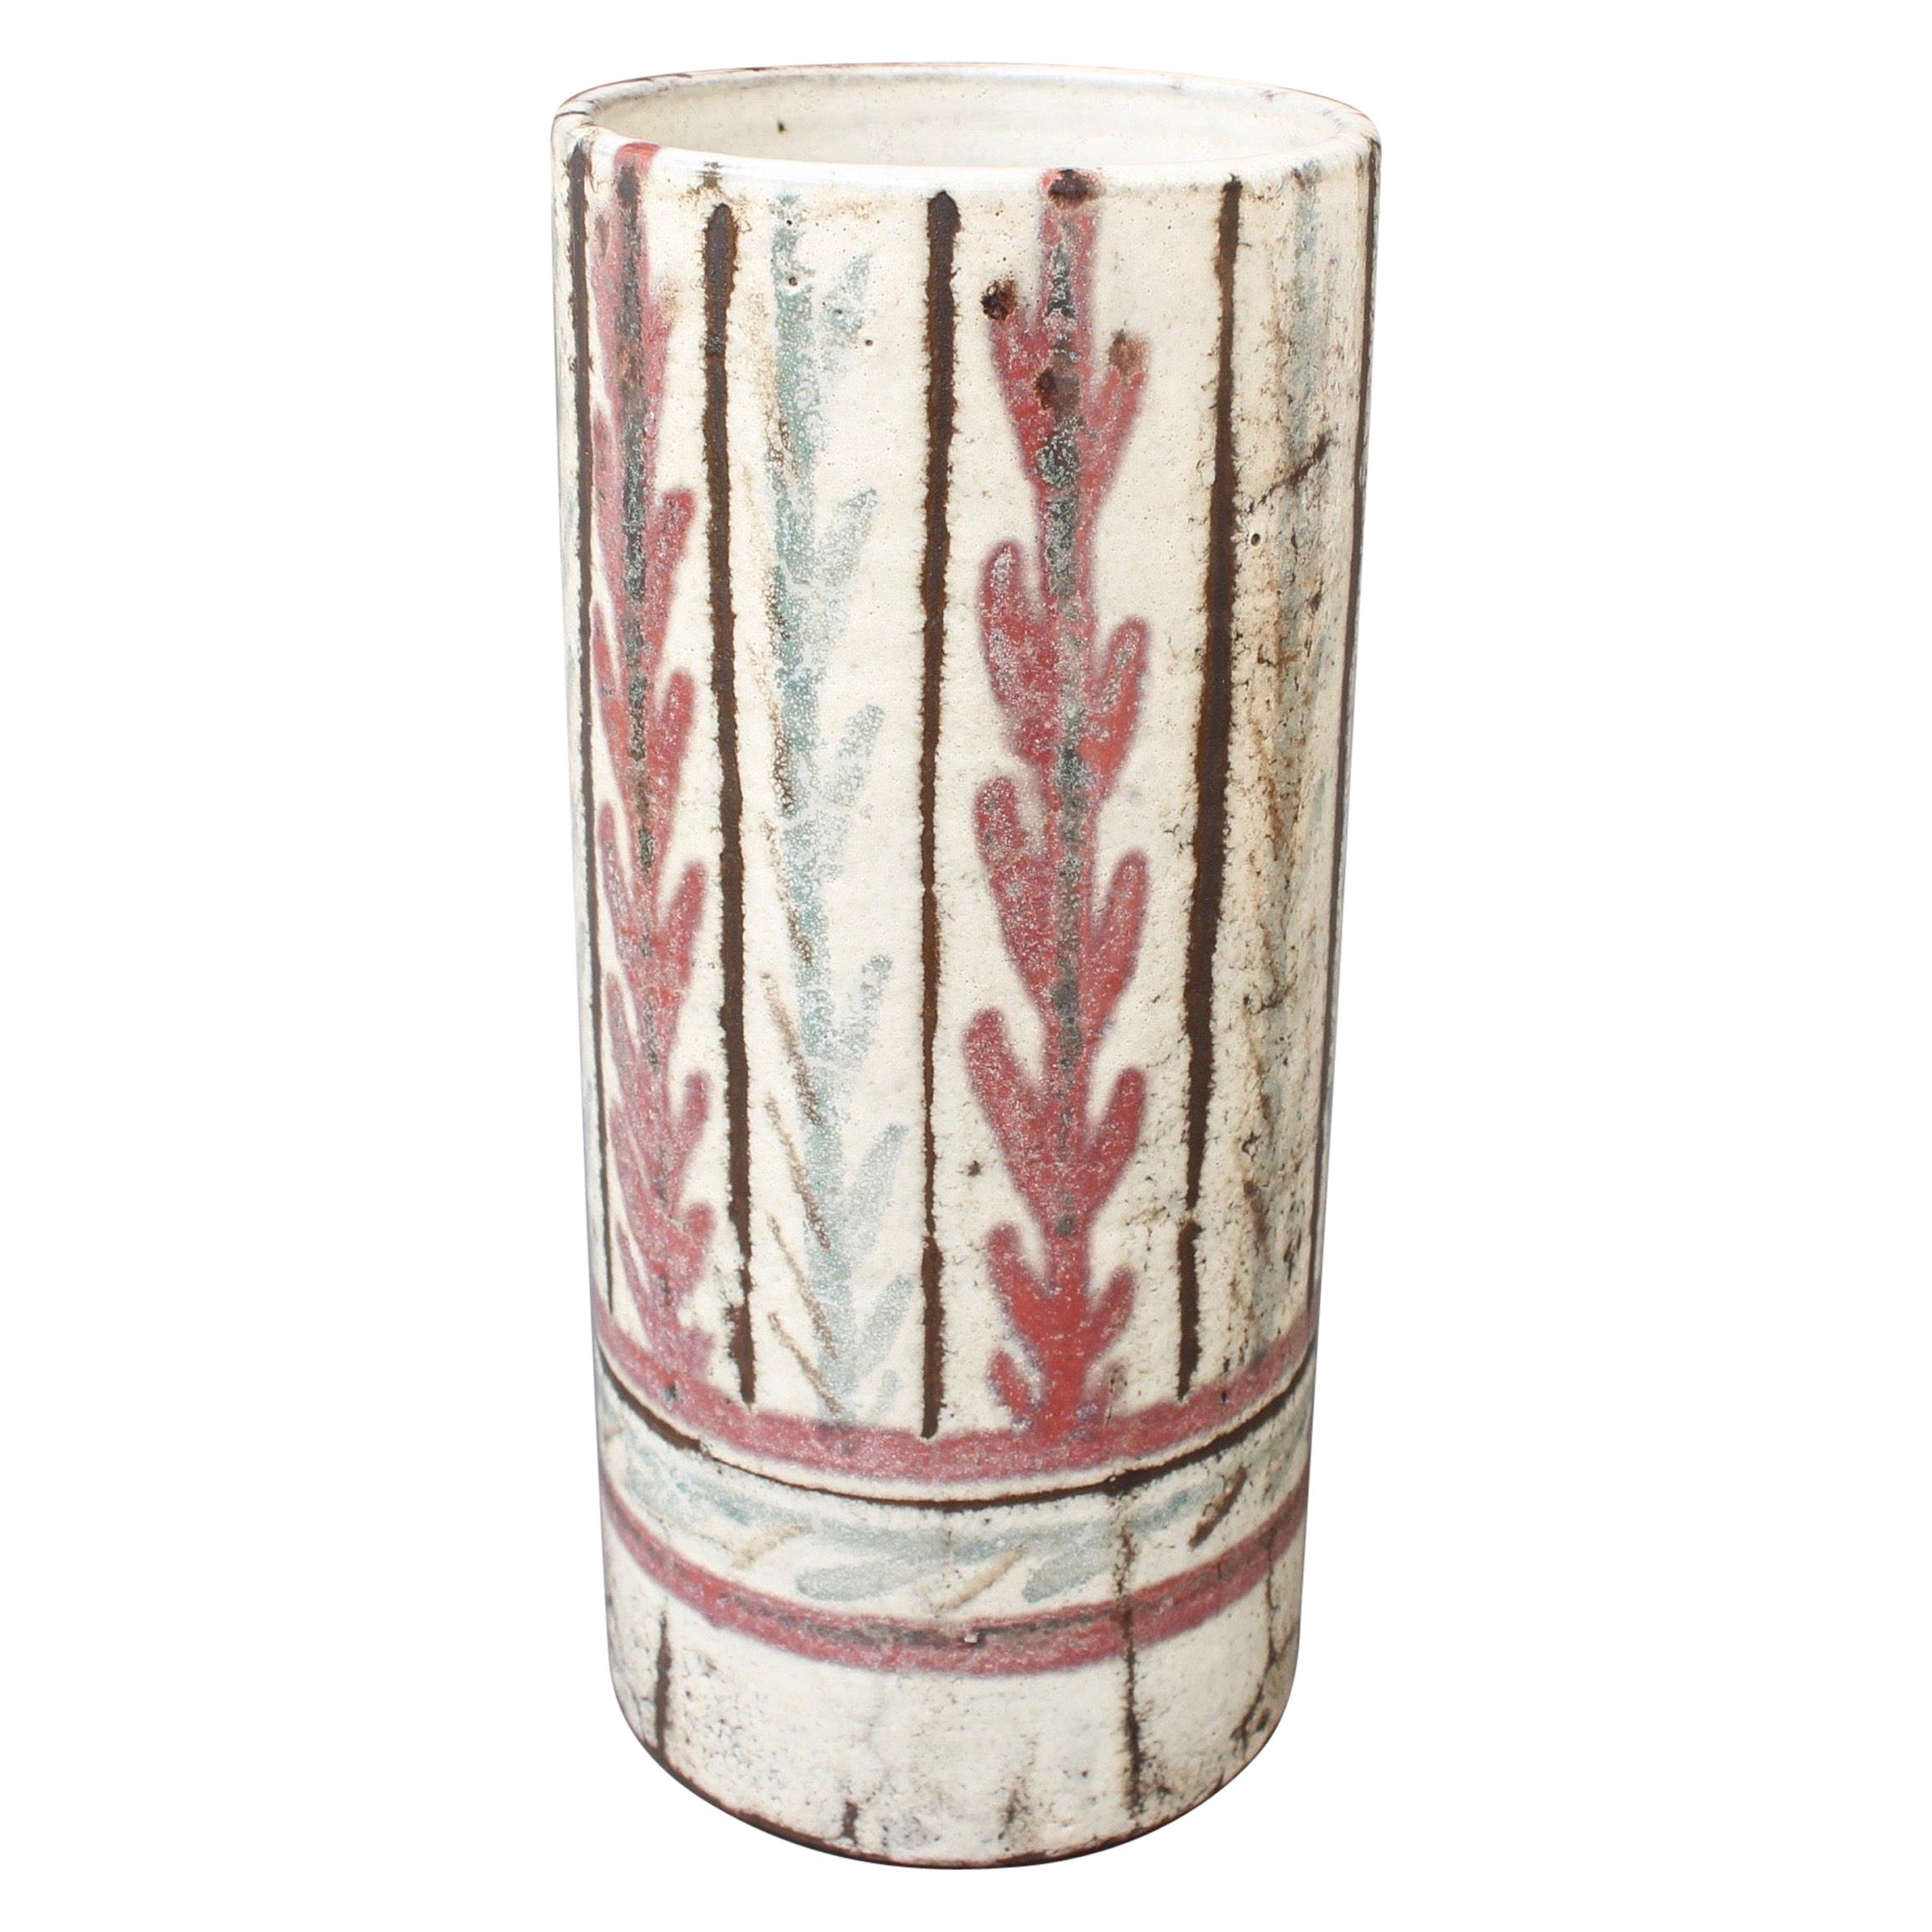 French Ceramic Vase by Gustave Reynaud, Le Mûrier, circa 1950s